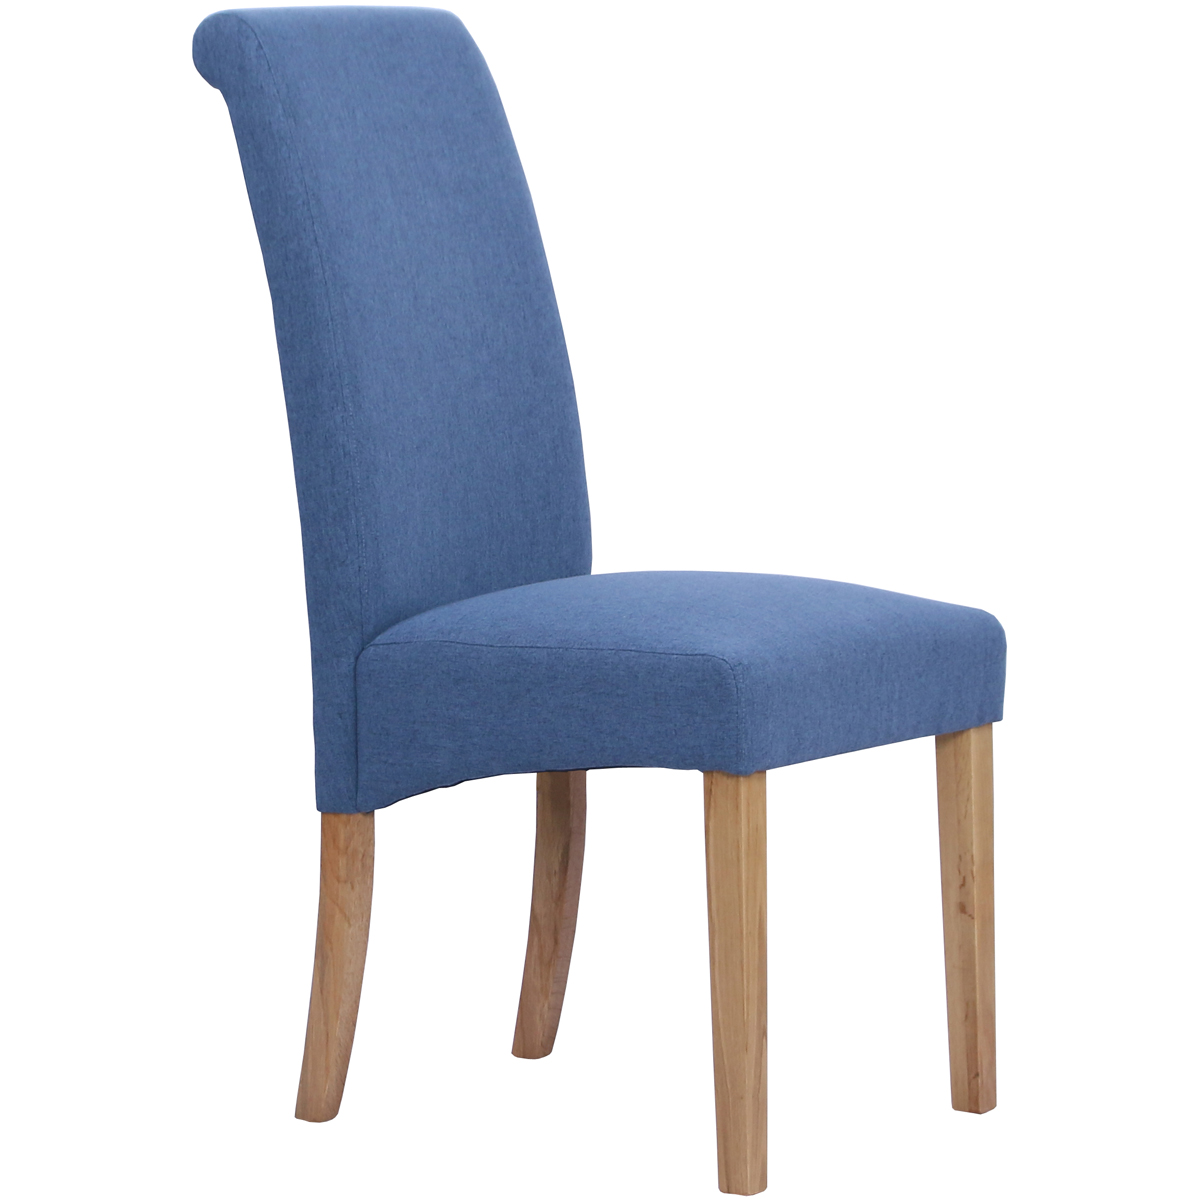 New Oak WES021 Dining Chair